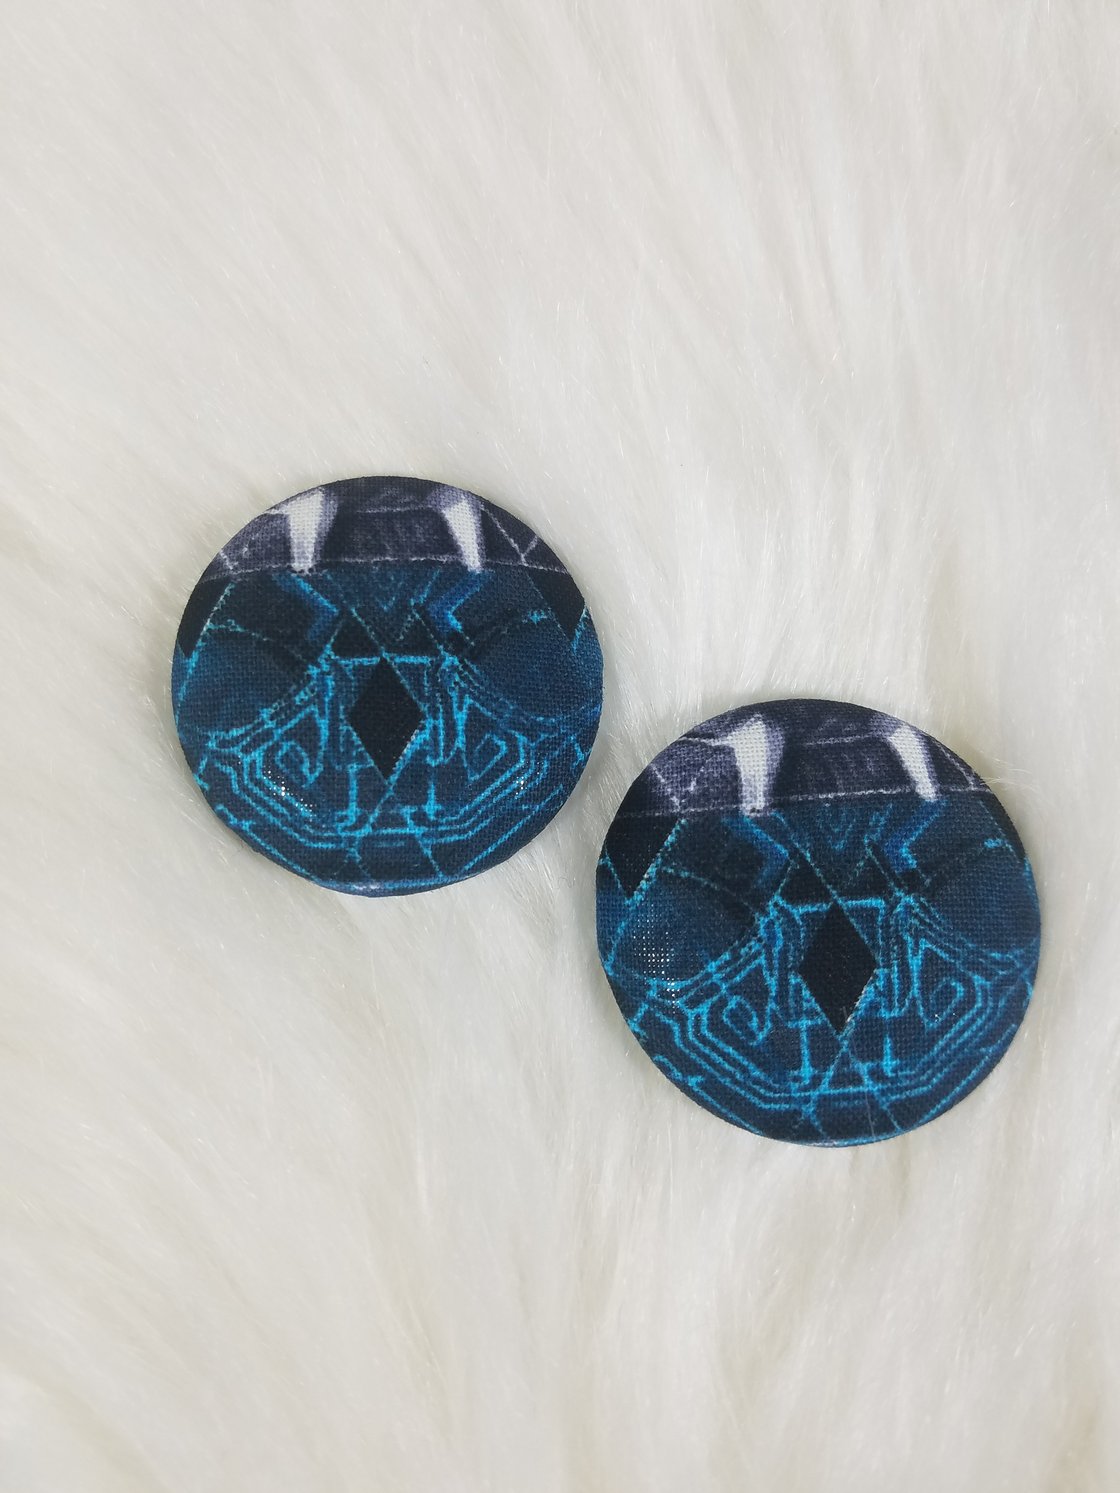 Image of Black Panther #2 Button Earrings